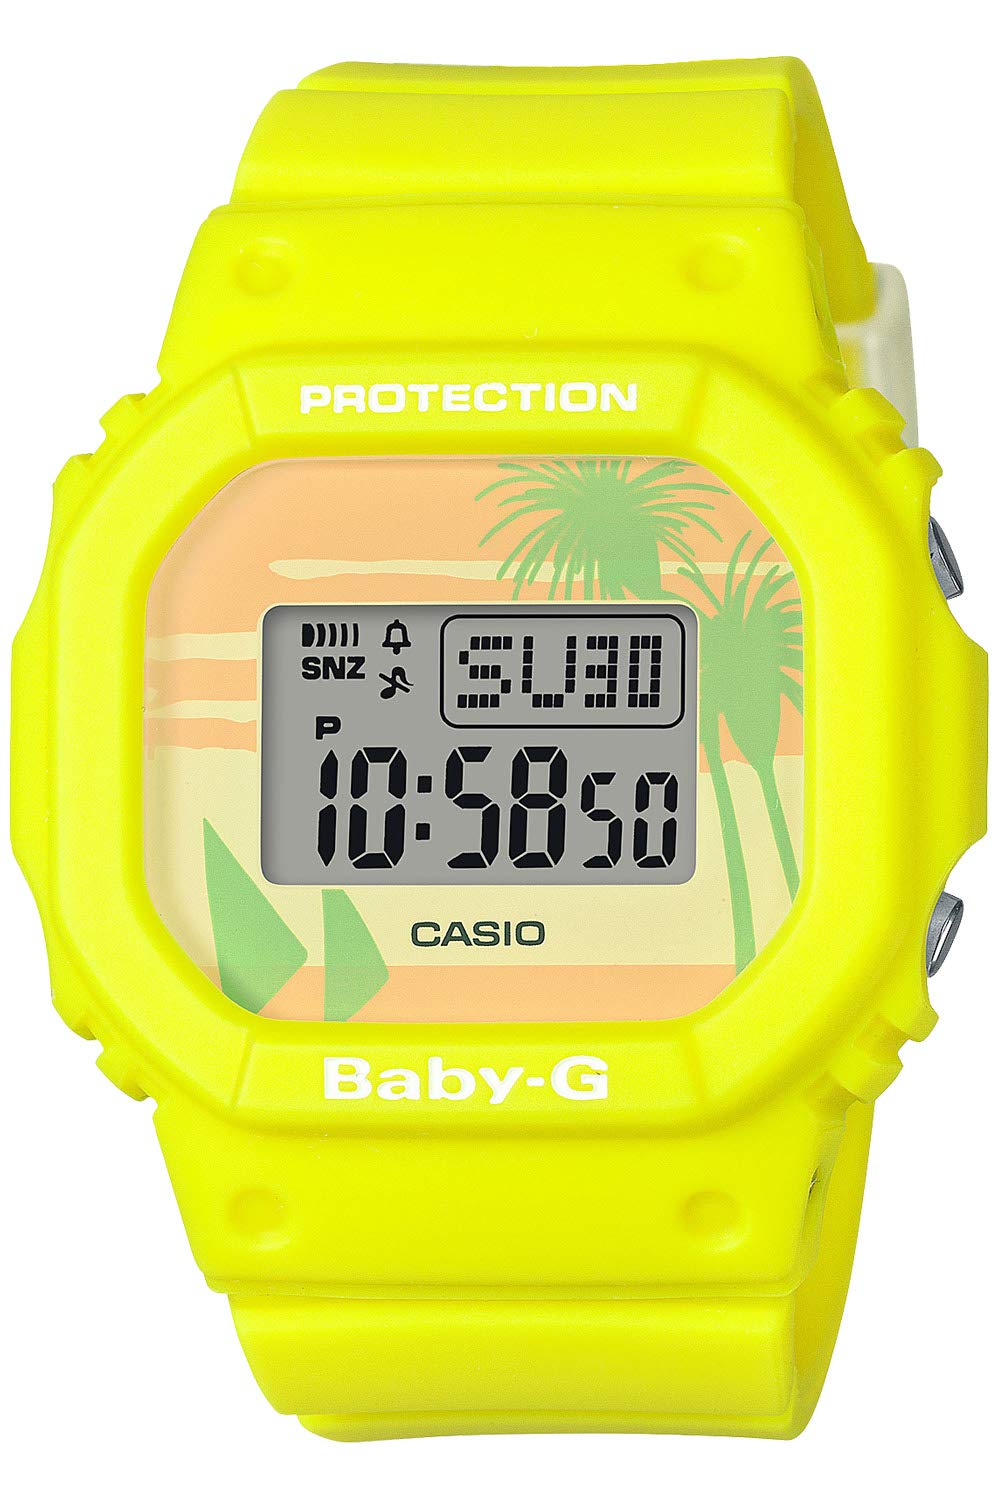 [Baby-G] [CASIO] Watch 80's Beach Colors BGD-560BC-9JF Yellow